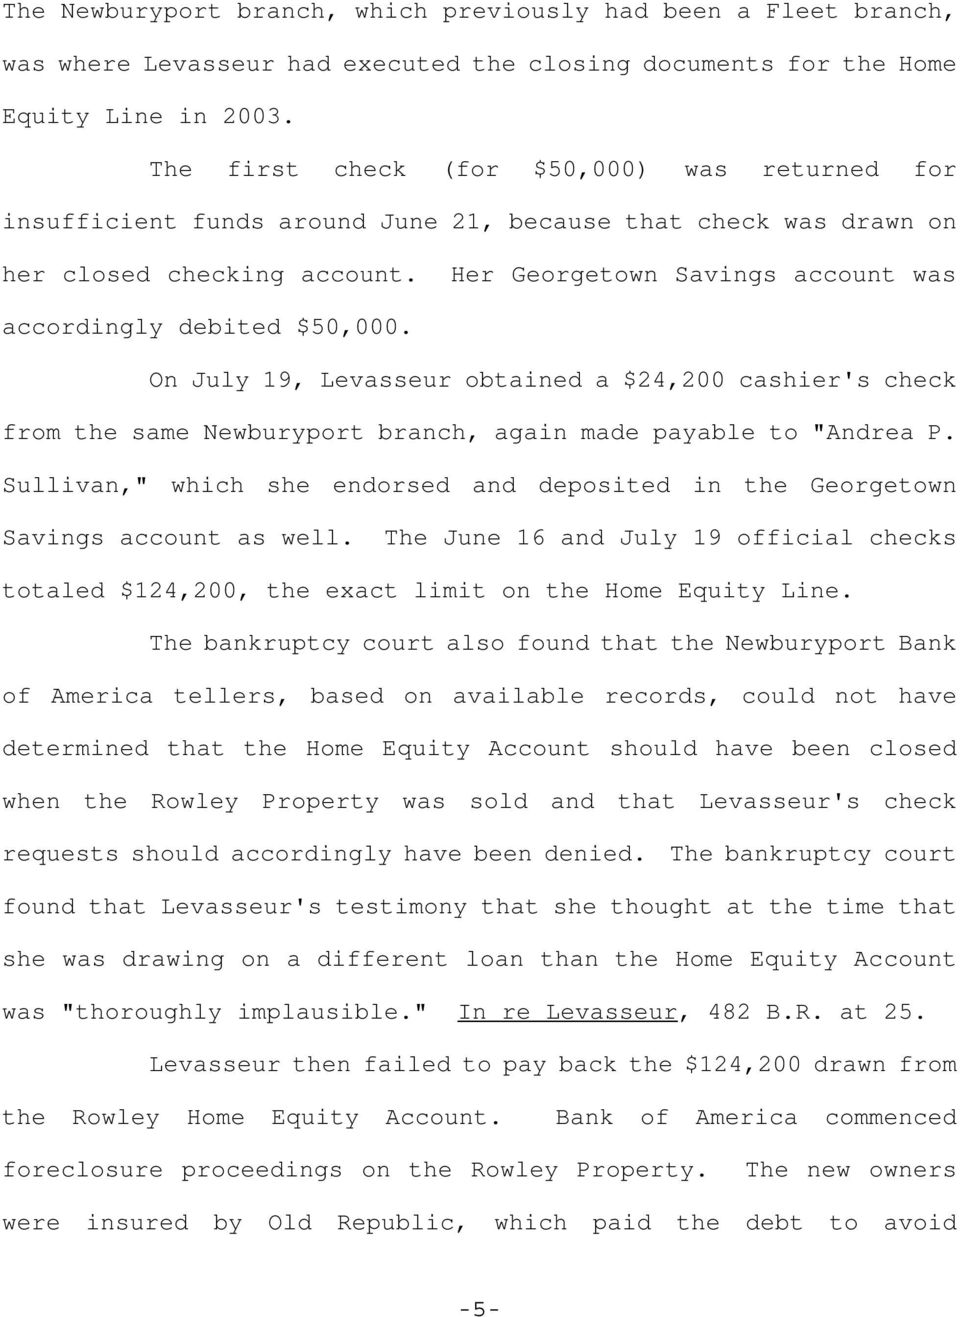 Her Georgetown Savings account was accordingly debited $50,000. On July 19, Levasseur obtained a $24,200 cashier's check from the same Newburyport branch, again made payable to "Andrea P.